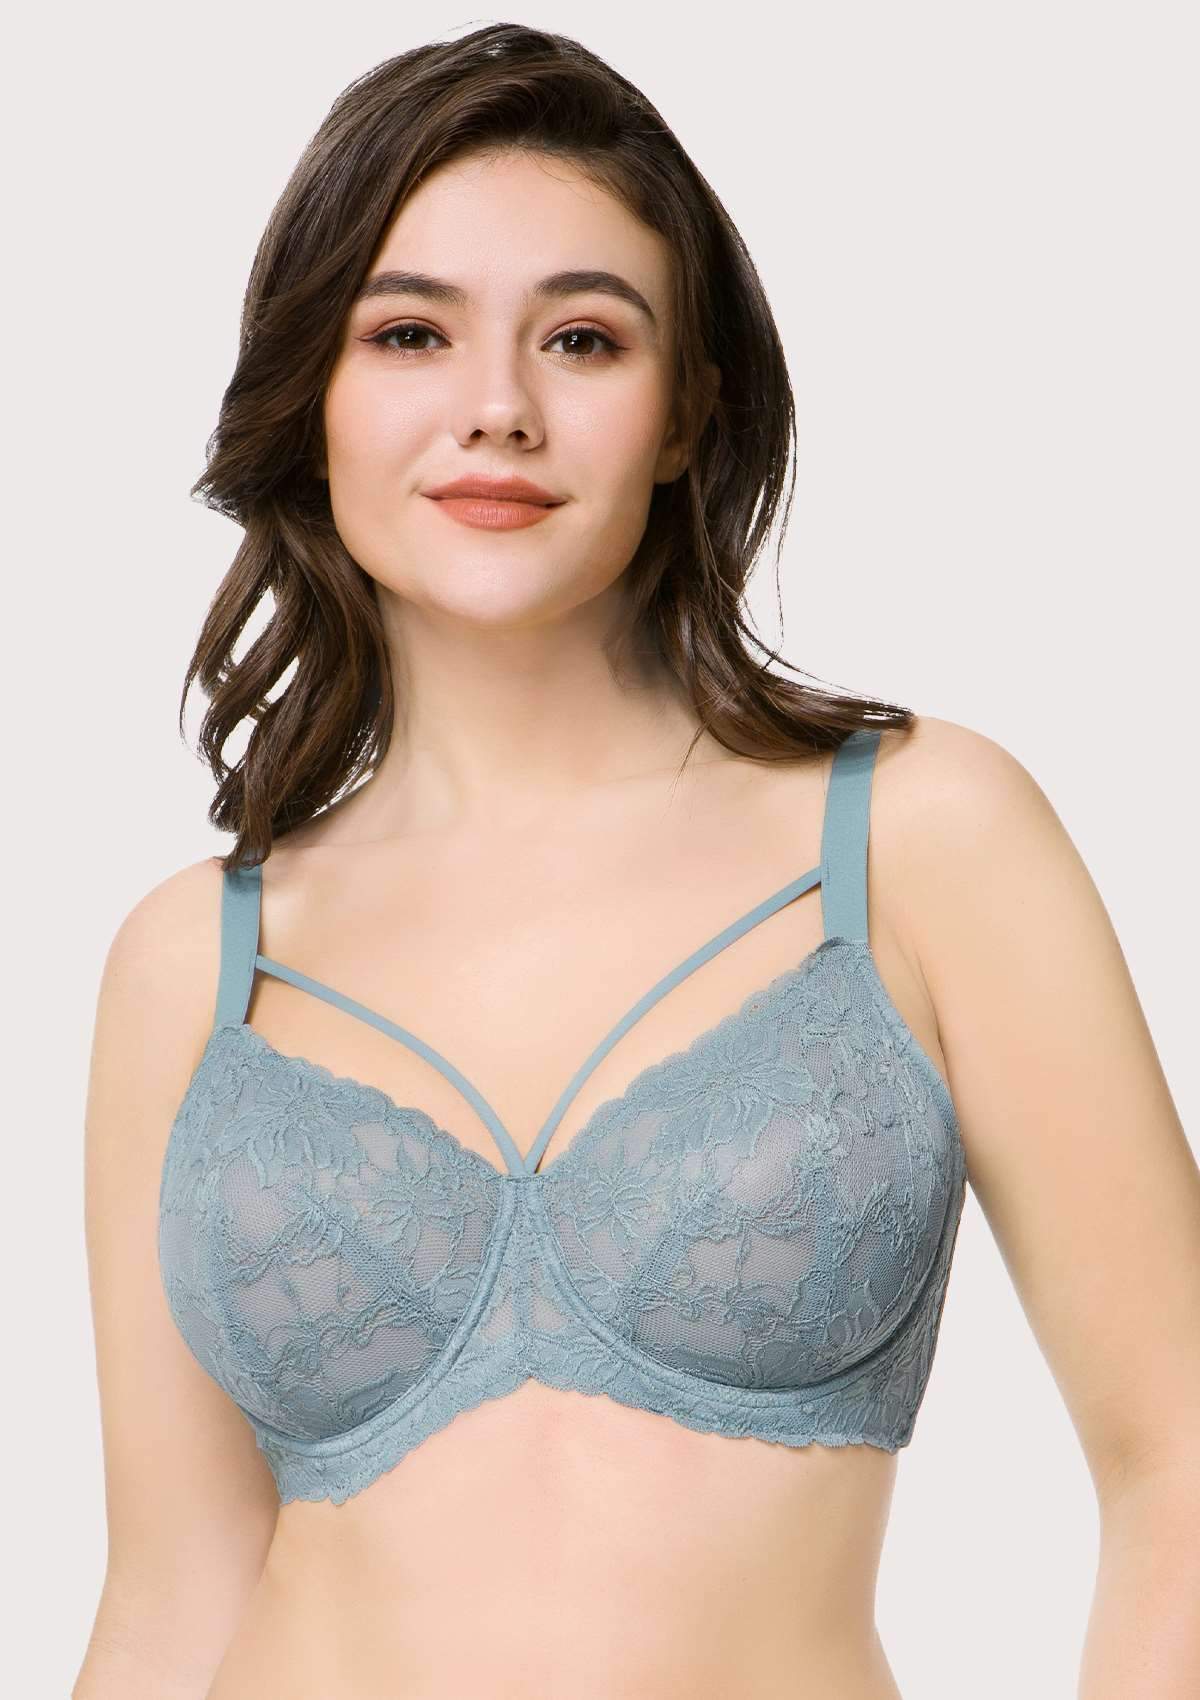 HSIA Pretty In Petals Unlined Lace Bra: Comfortable And Supportive Bra - Crystal Blue / 36 / DDD/F